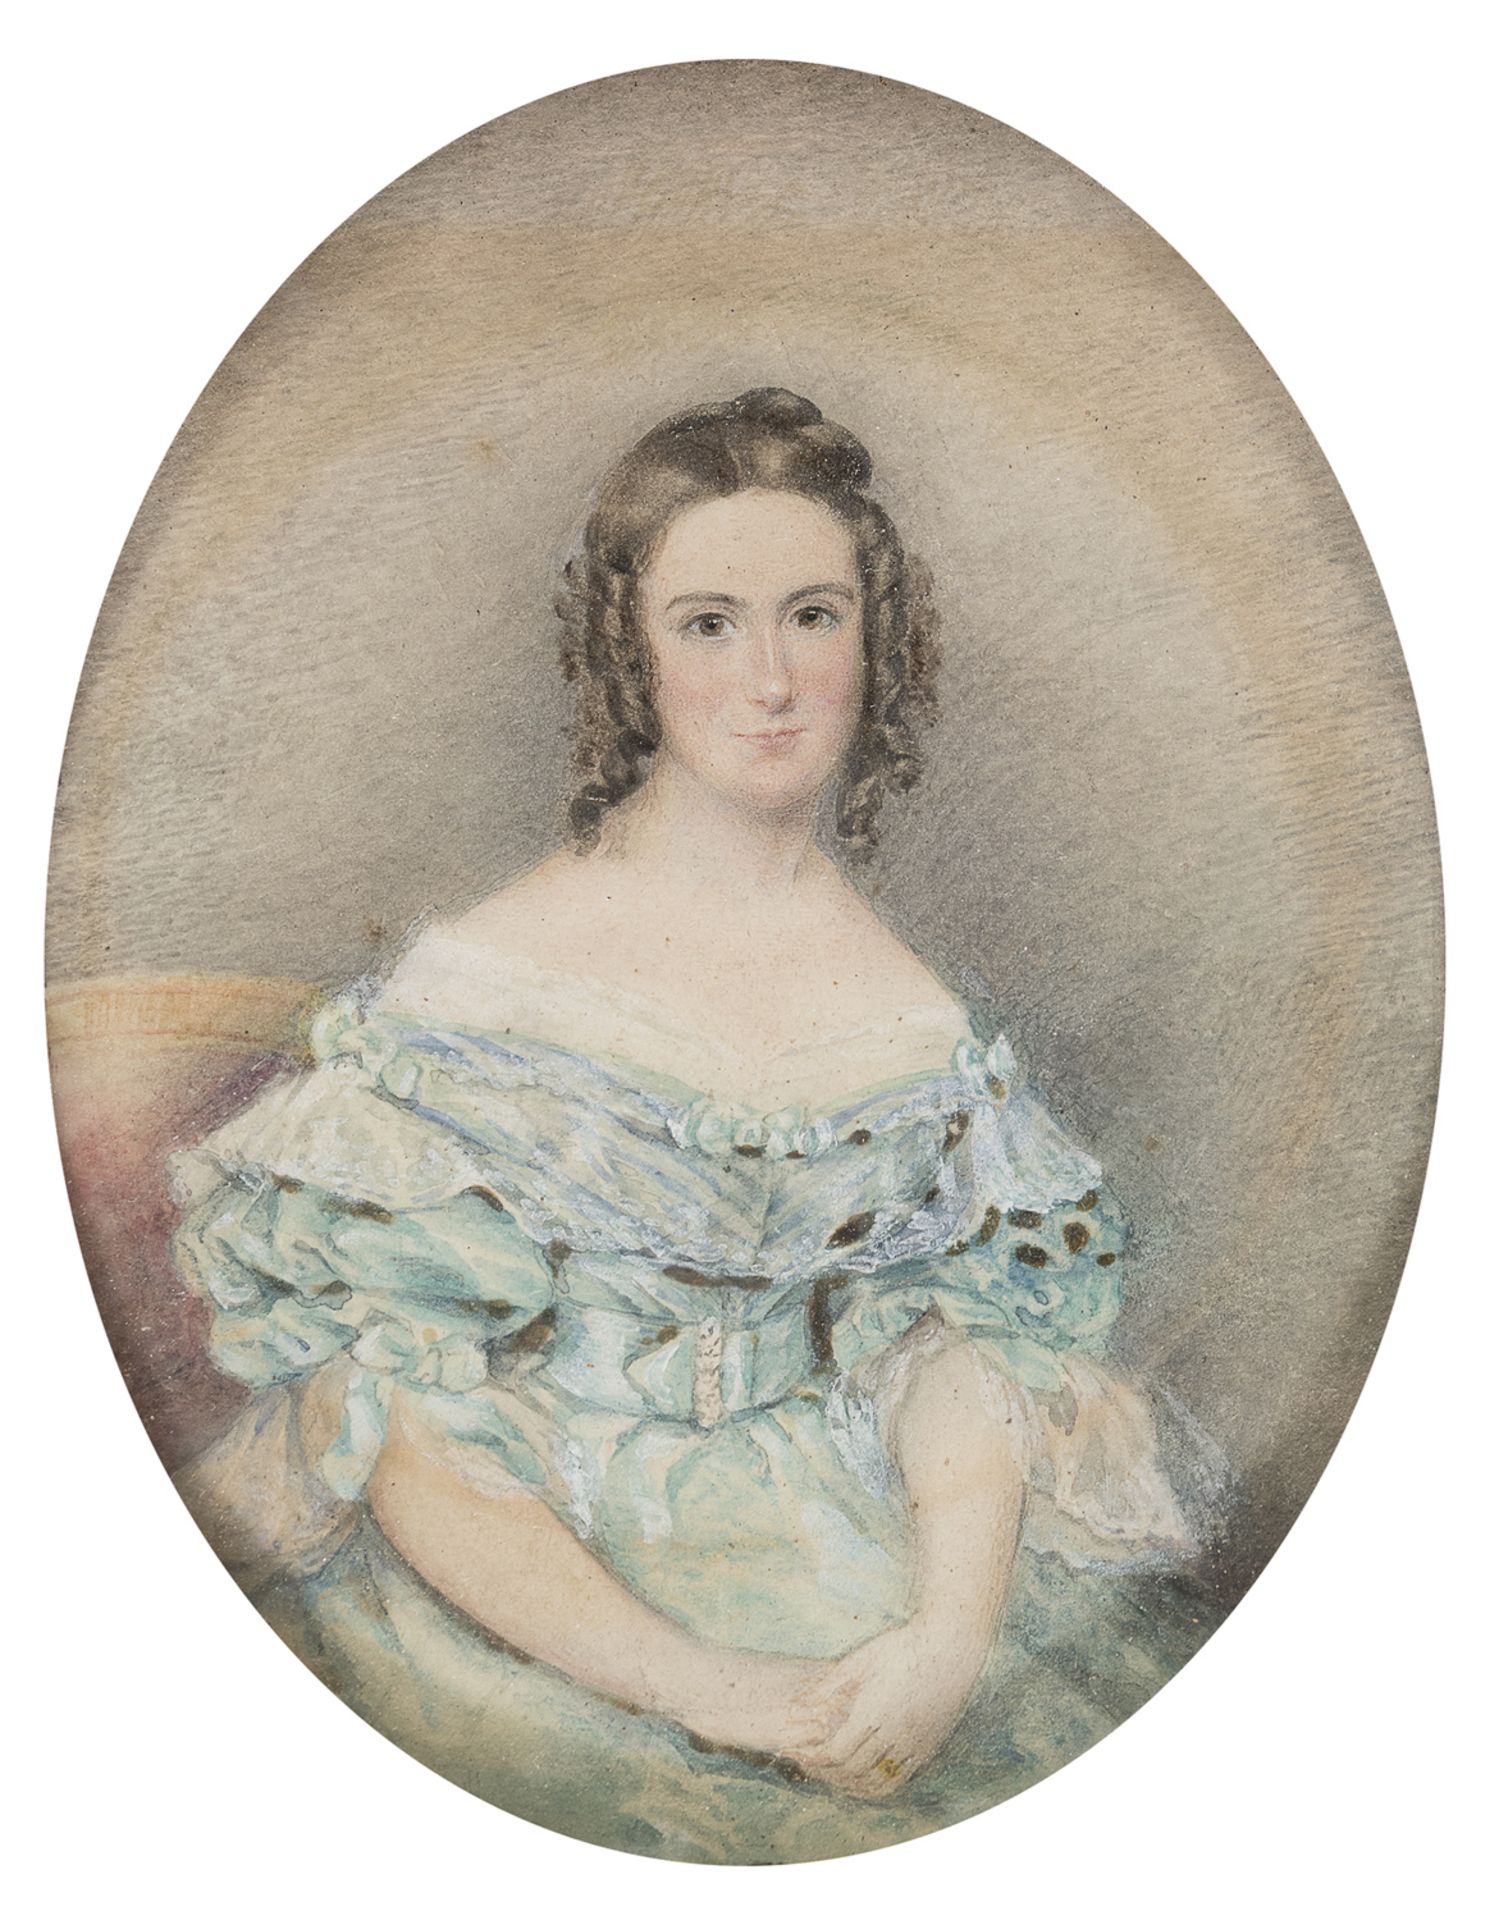 WATERCOLOR OF A WOMAN 19TH CENTURY - Image 2 of 2